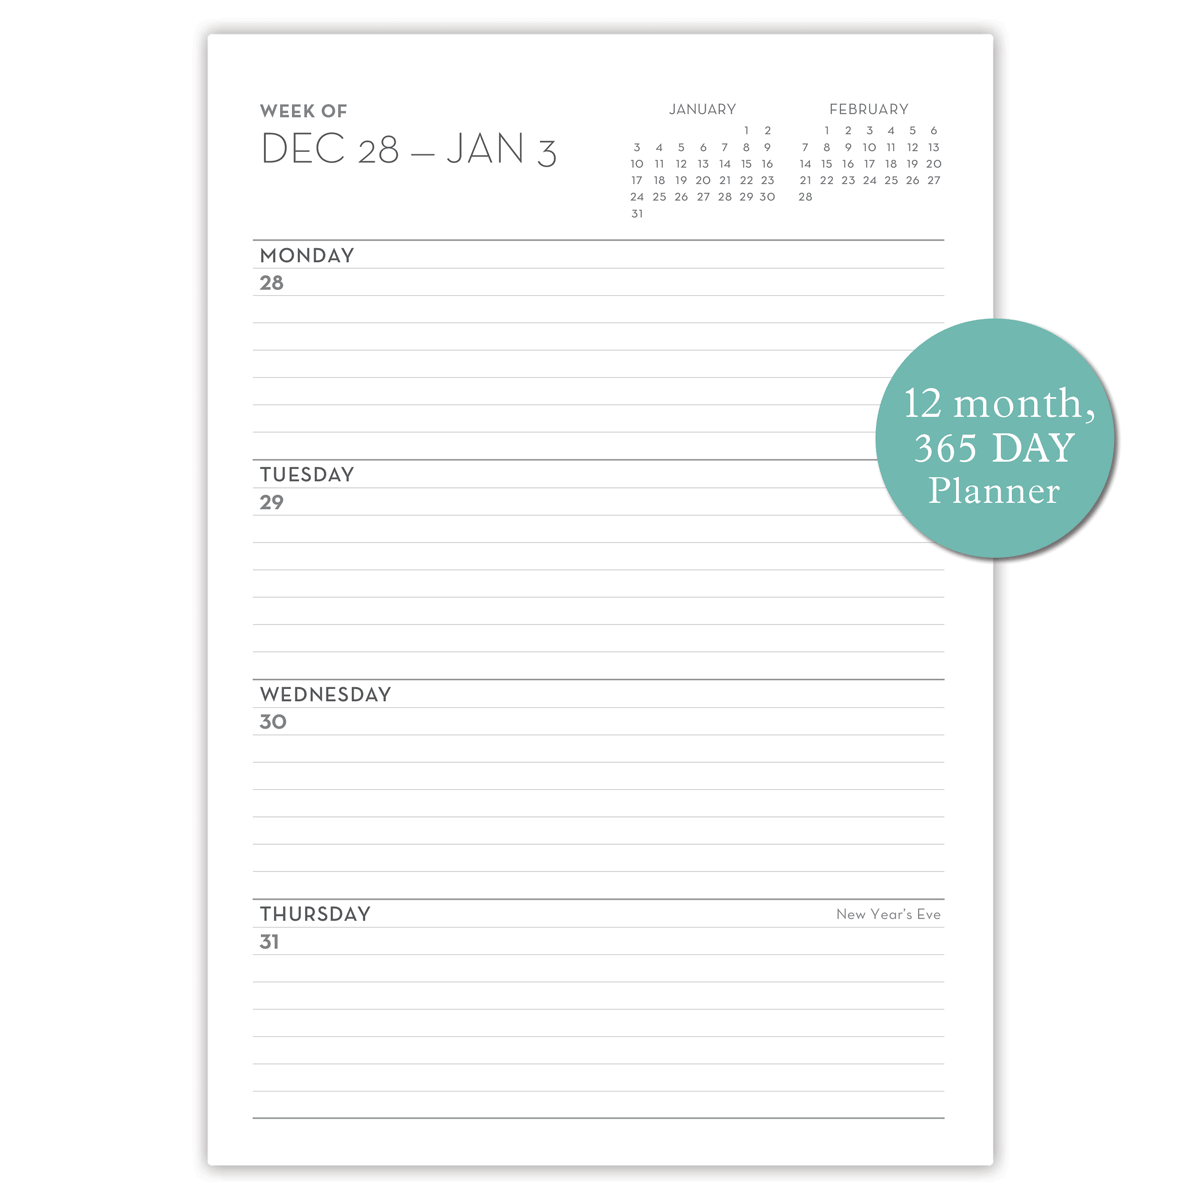 Rise Up (Planner) by Heather Hostetter